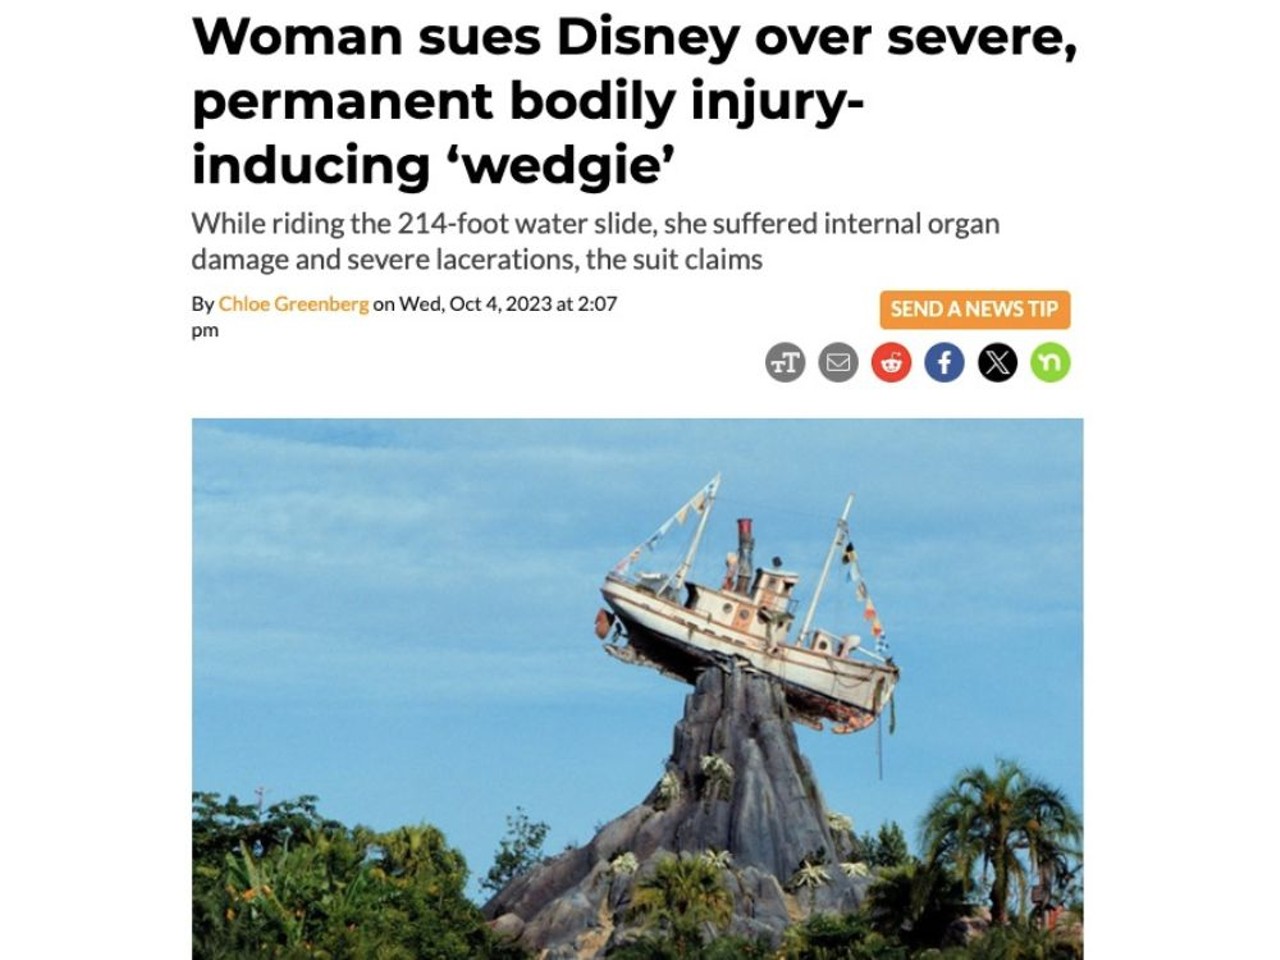 Emma McGuinness visited Disney World in October 2019 with her family to celebrate her 30th birthday. But after riding the 214-foot Humunga Kowabunga water slide, she suffered an "injurious wedgie," according to a lawsuit filed by McGuinness and her husband, Edward McGuinness, in Orange County in September. Read full article